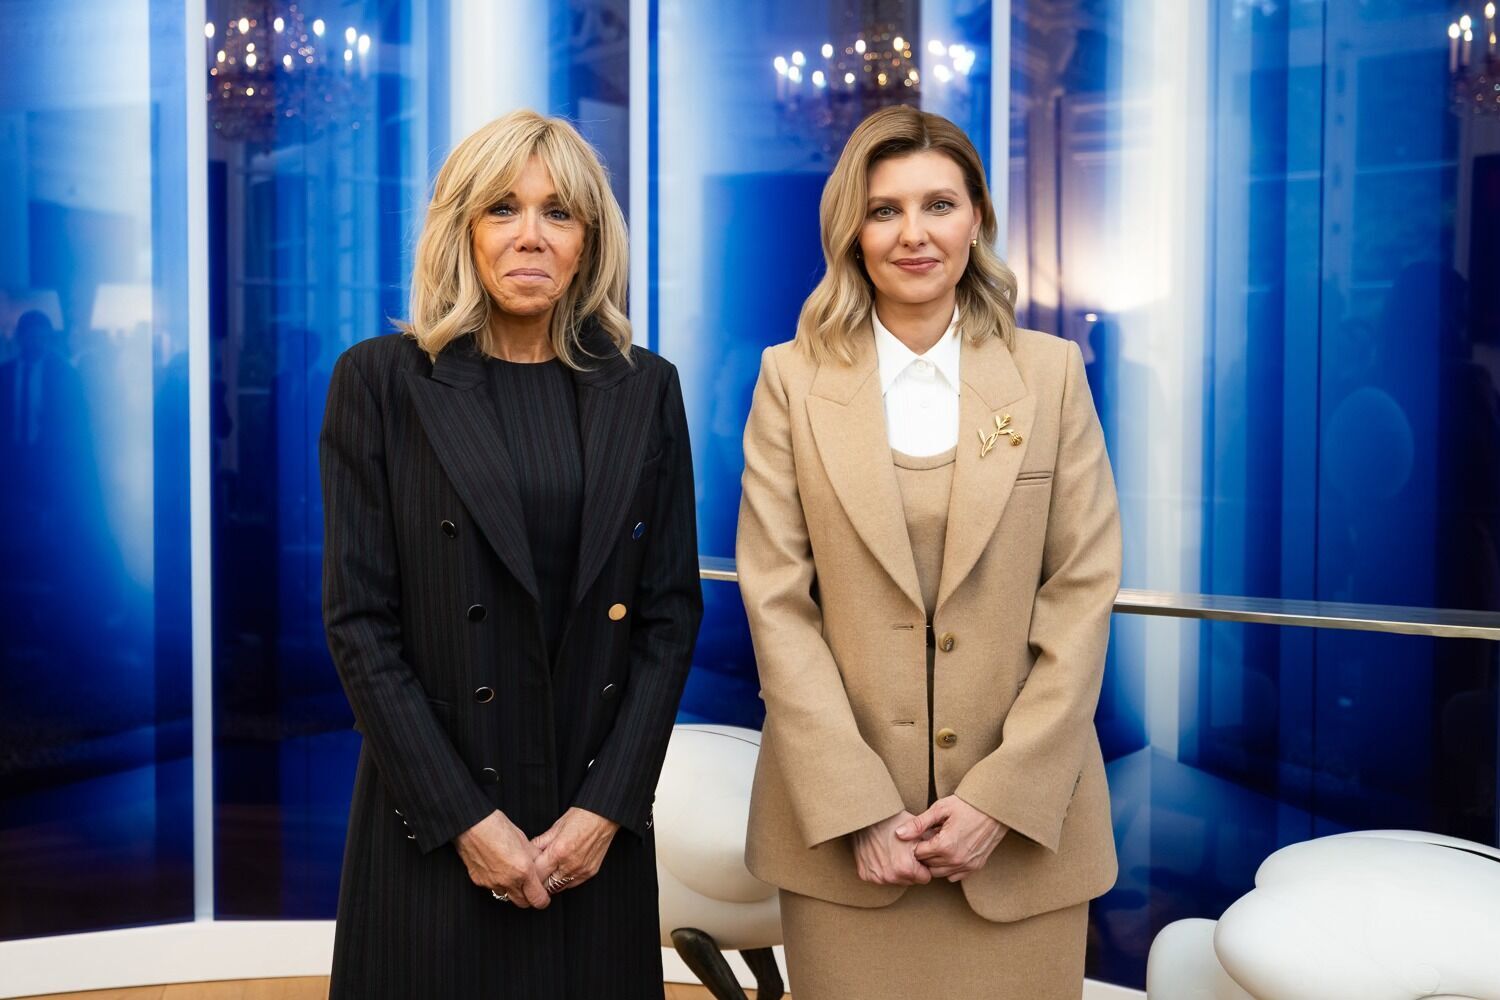 Zelenska chose an elegant three-piece suit from The Coat for a meeting with Macron in Paris. What does it mean